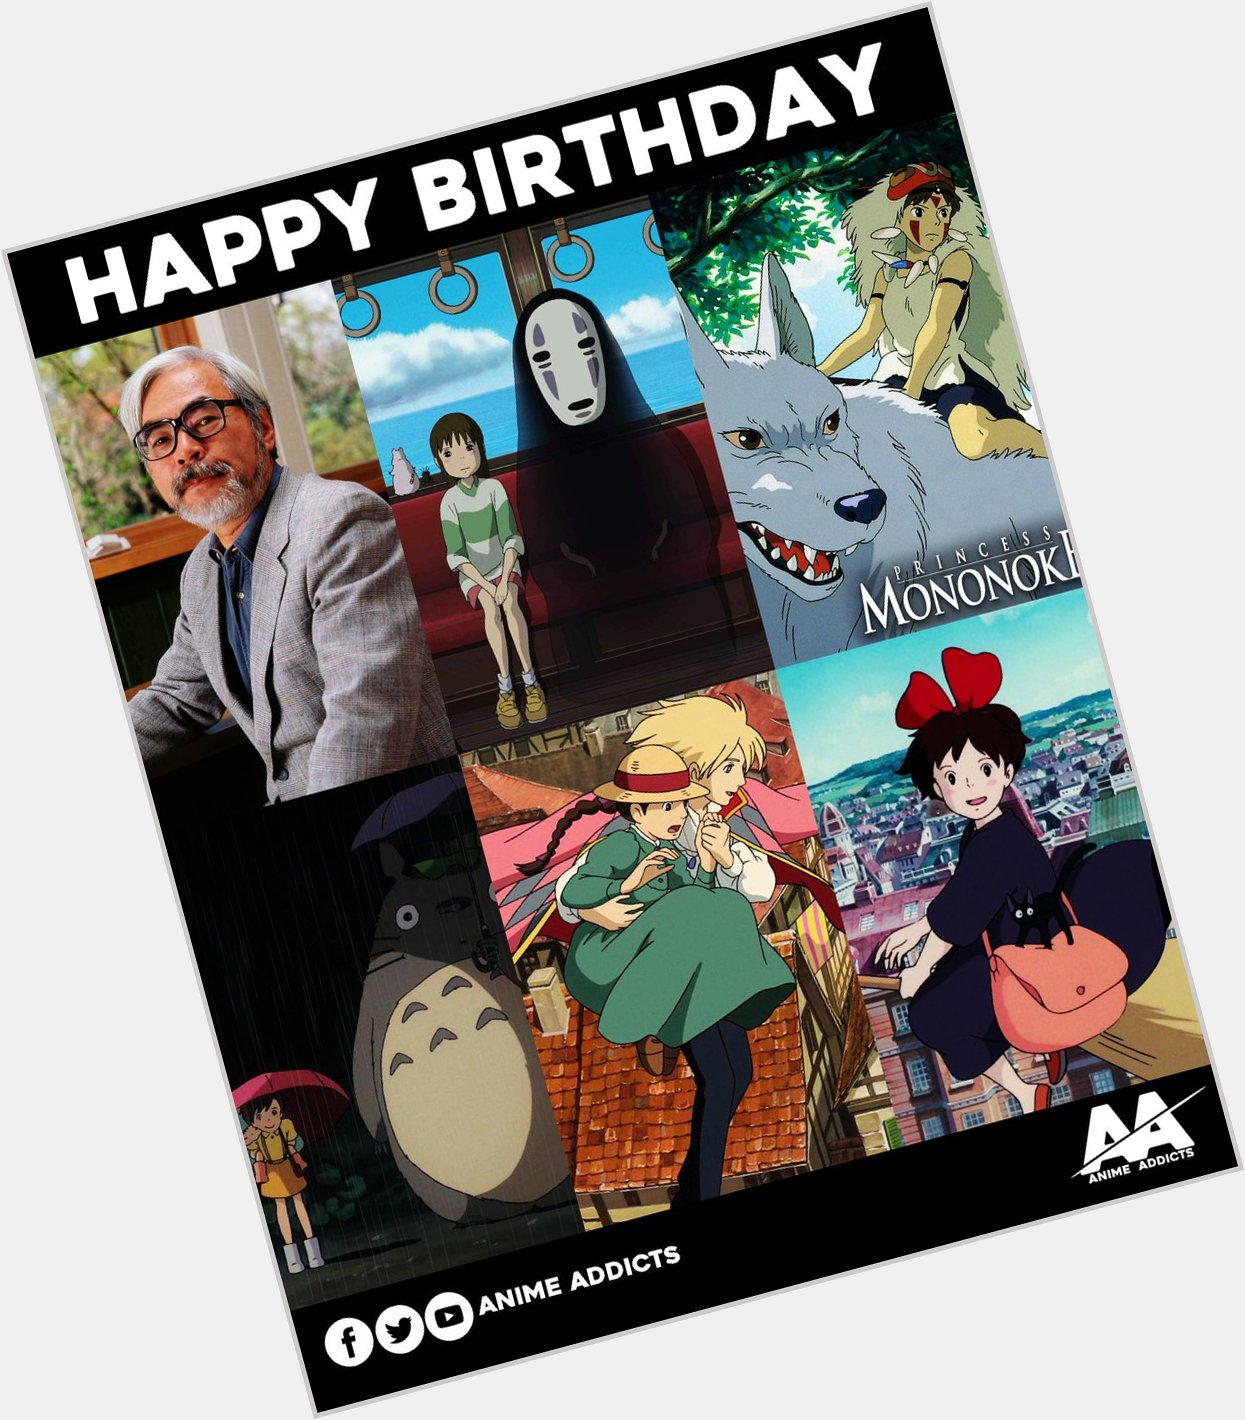 (1/5) Happy 80th Birthday to the legendary Hayao Miyazaki! Thank you for all the amazing stories! 